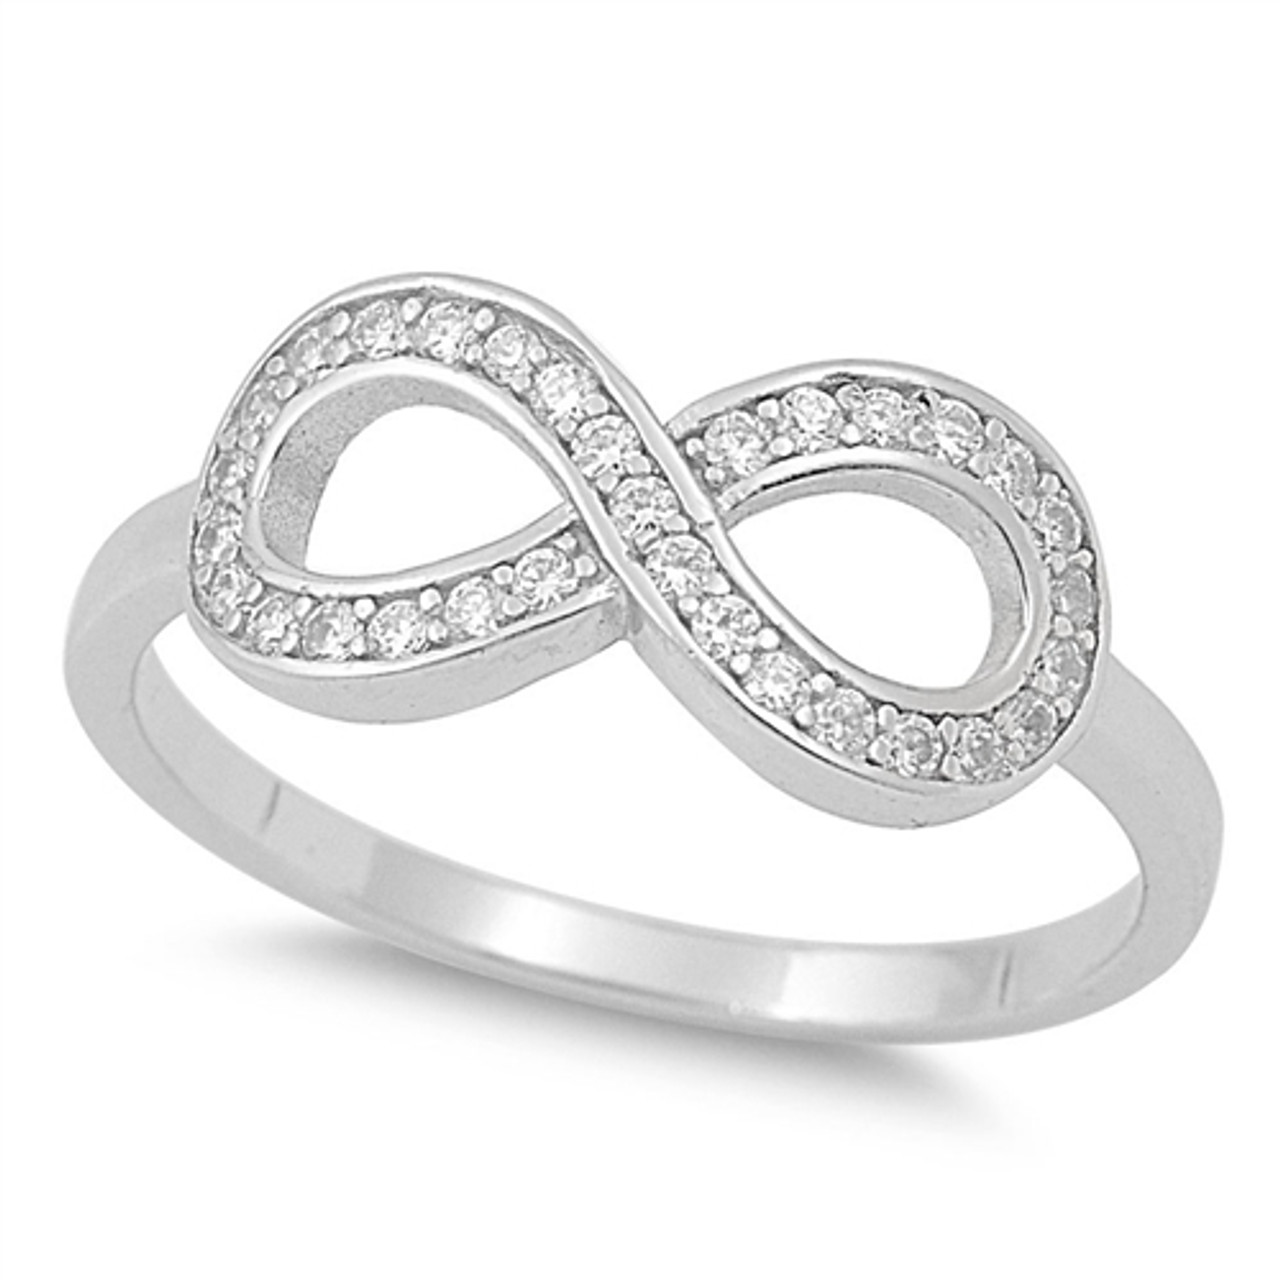 Tiny Dainty Small Sun Engraved Infinity And Wings Ring Band 925 Sterling  Silver Size 9 